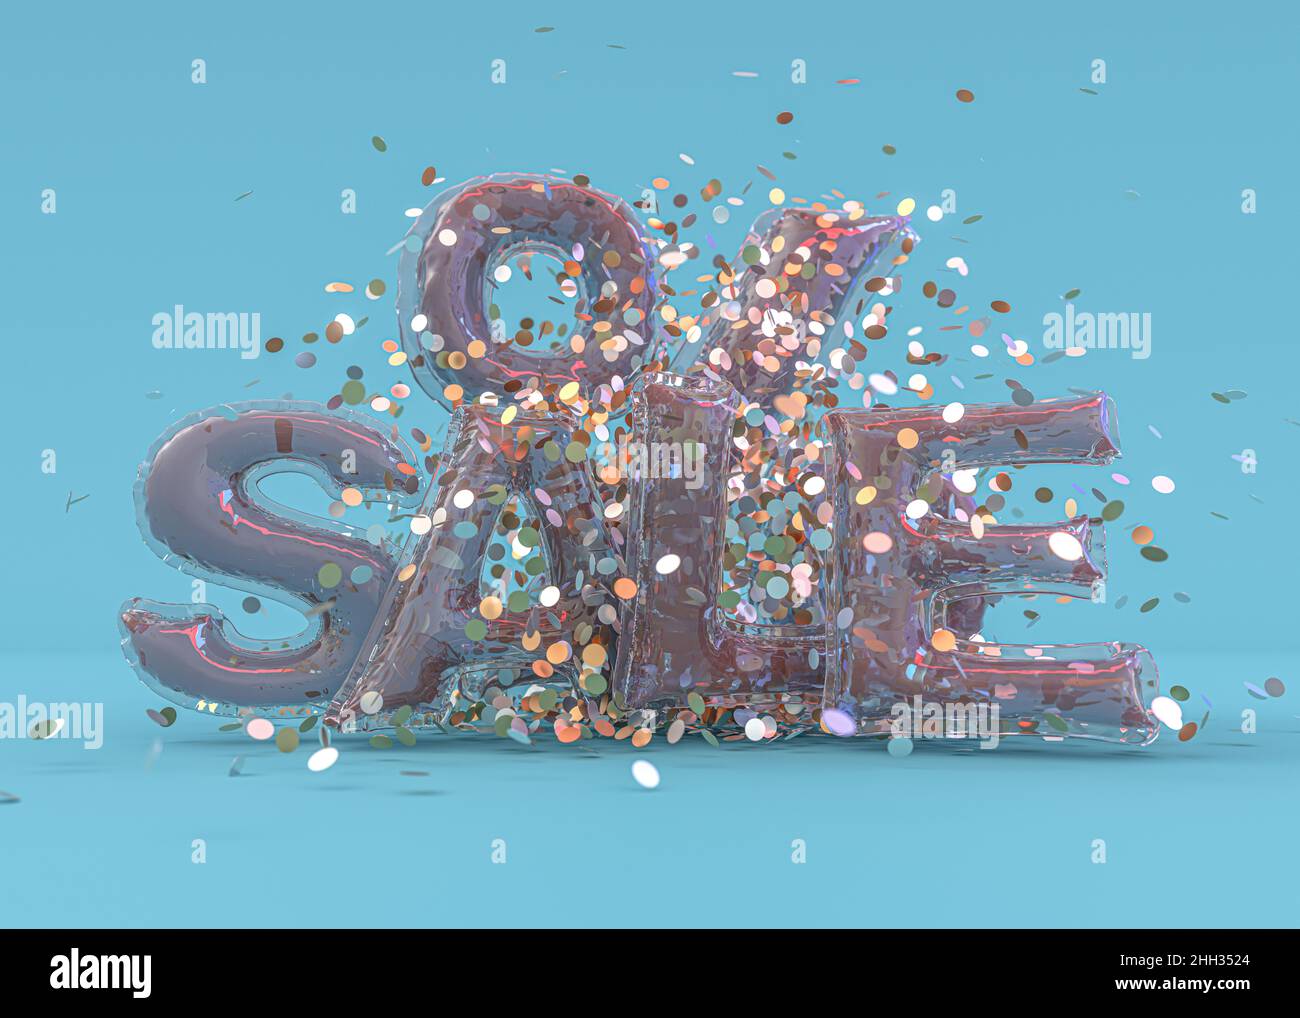 Words Sale made of inflatable balloons on blue background with glitter. 3D rendering Stock Photo